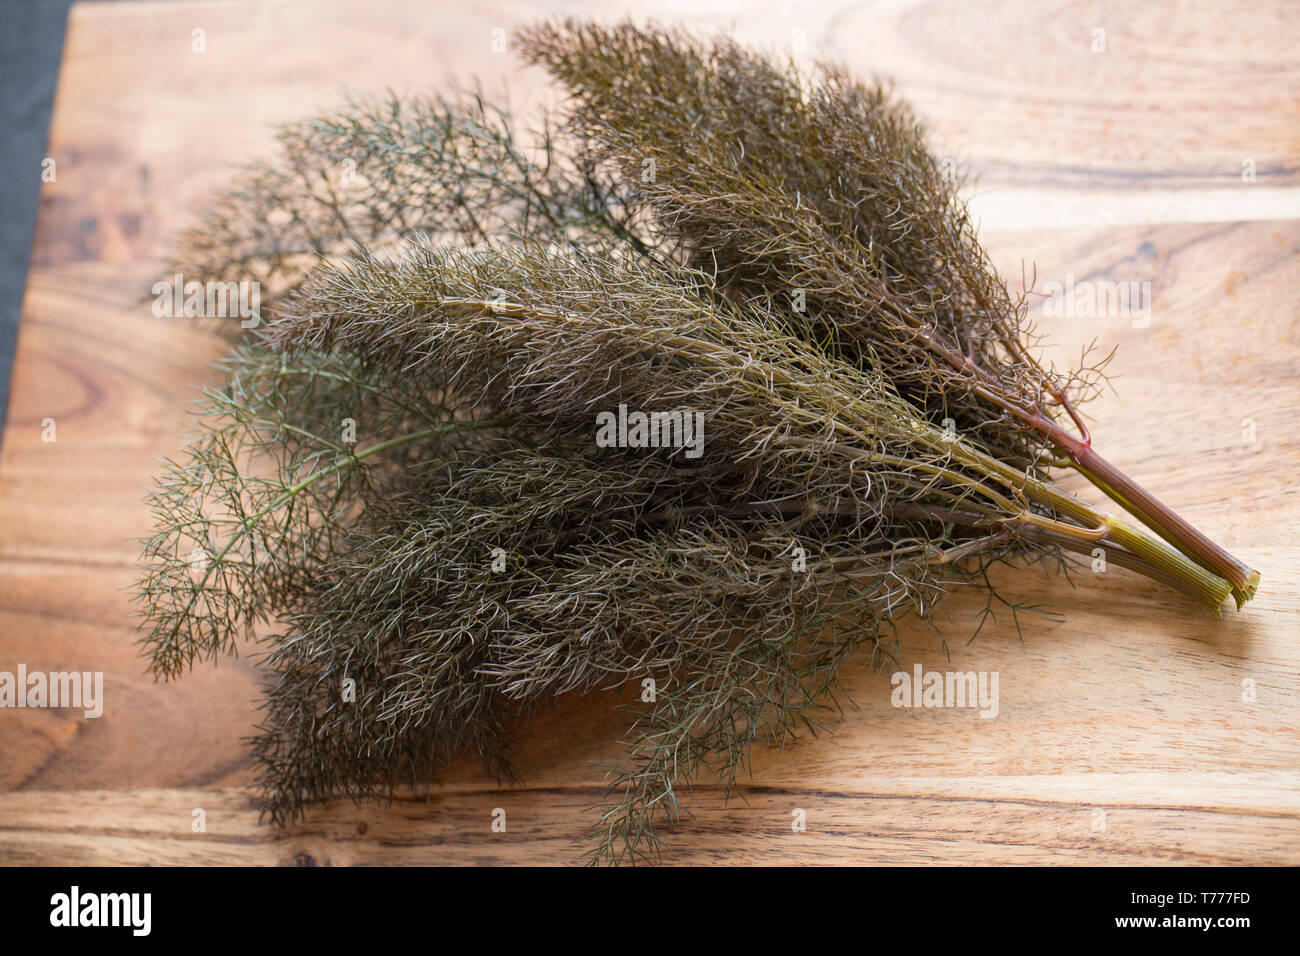 Sprigs of bronze fennel, Foeniculum vulgare purpureum, from a plant found growing wild at the side of a footpath. It will be used to flavour a fish st Stock Photo